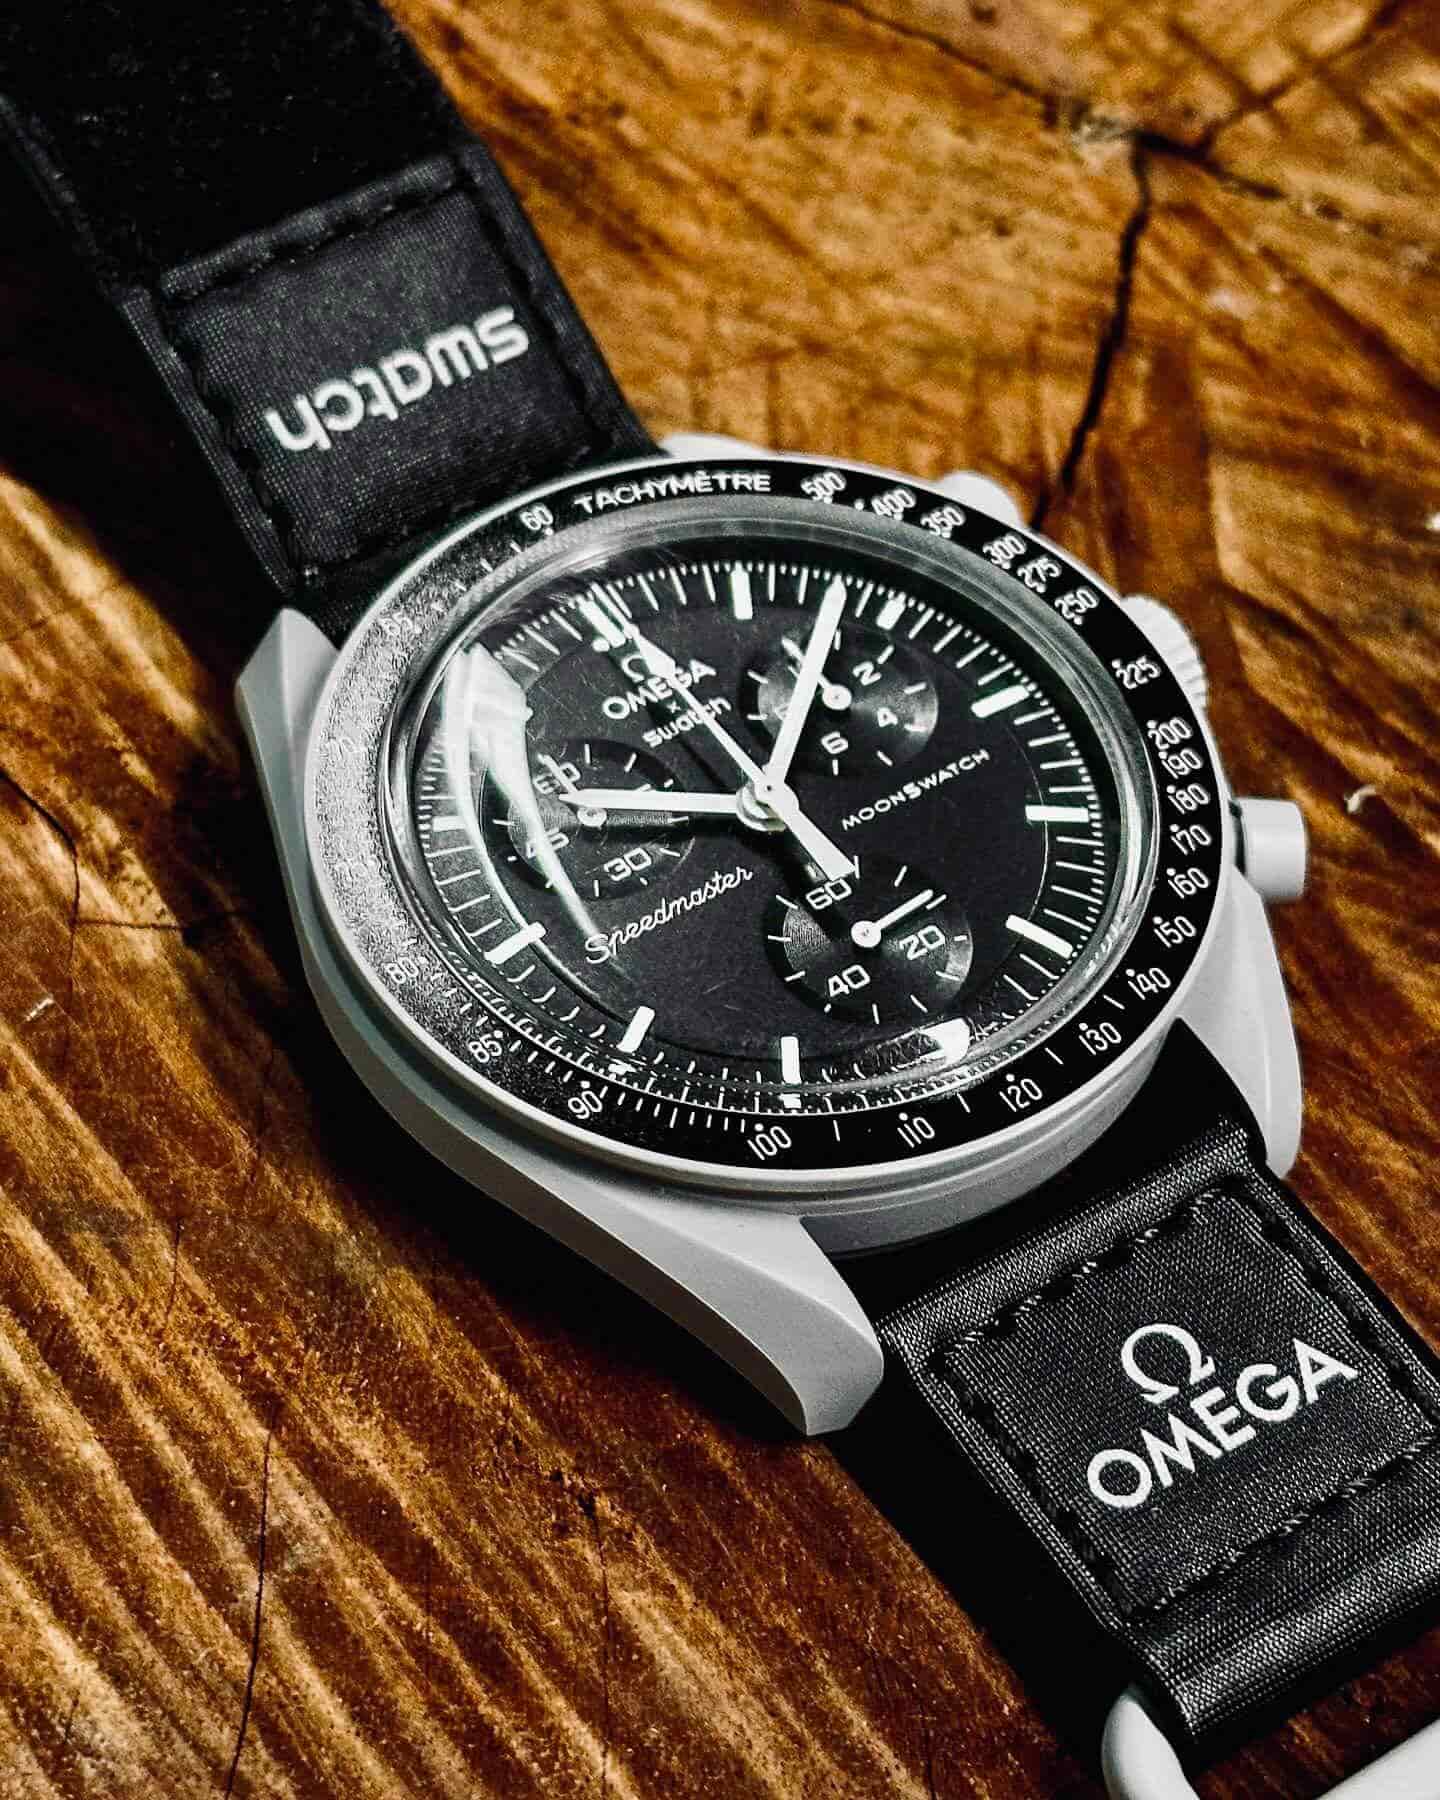 Omega MoonSwatch Mission to the Moon SO33M100